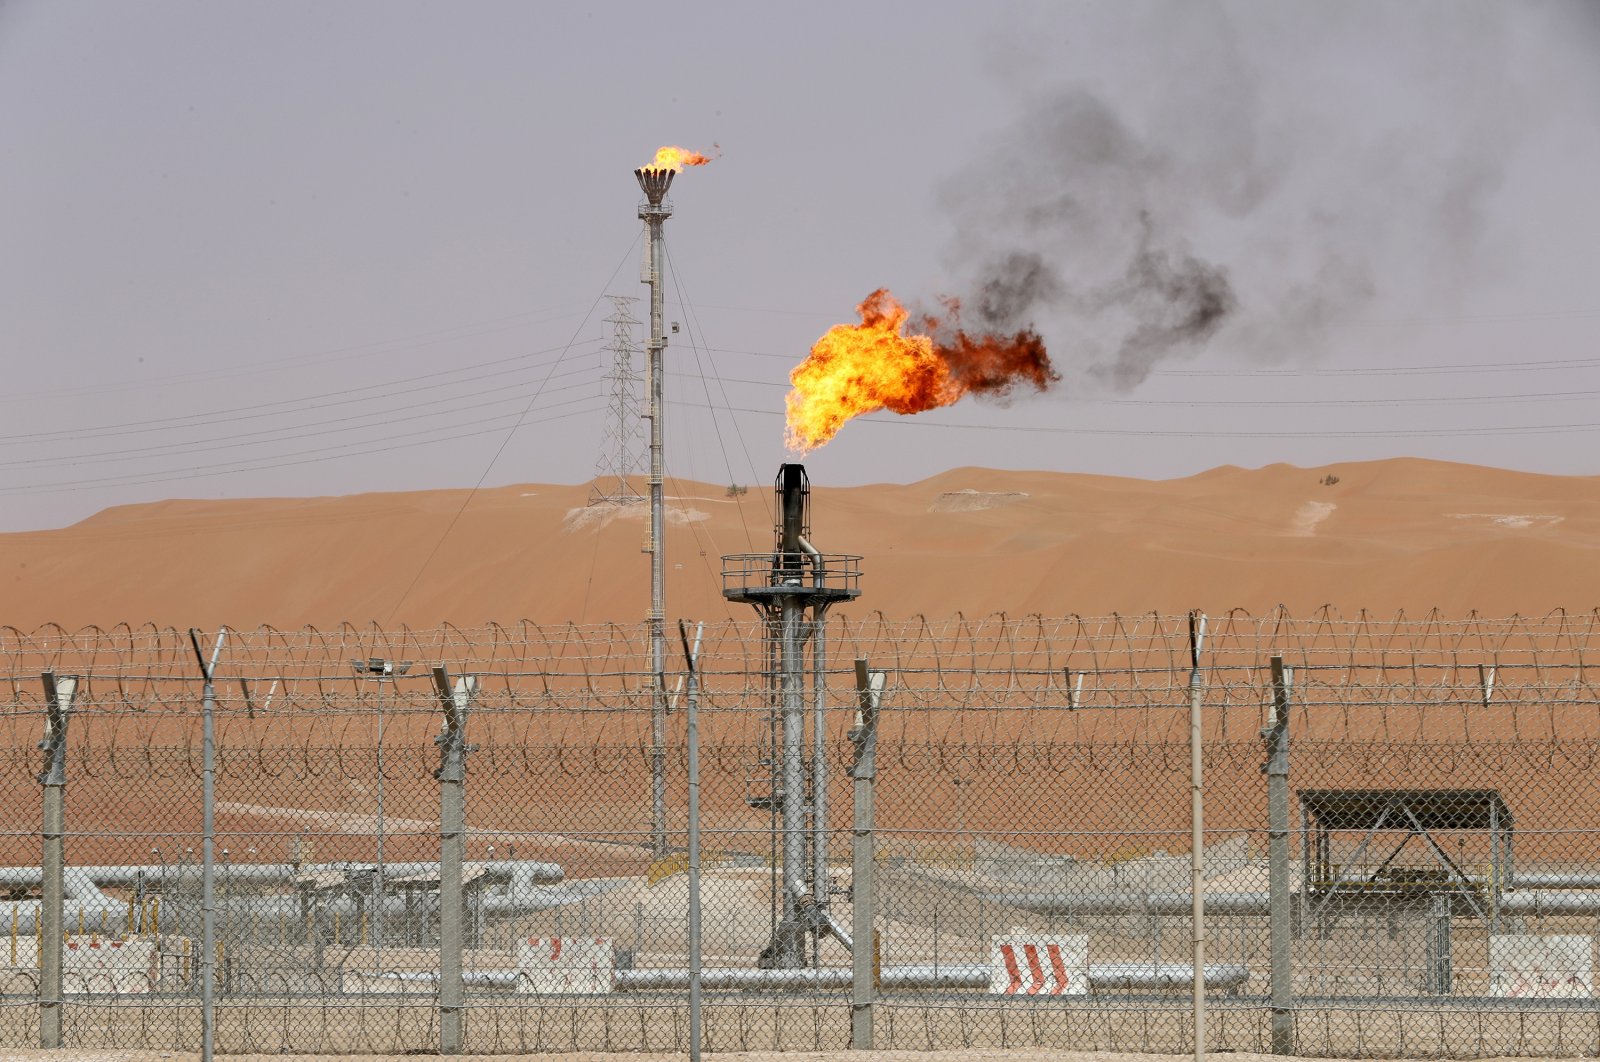 Flames are seen at Saudi Aramco's production facility at Shaybah oil field in the Empty Quarter, Saudi Arabia, May 22, 2018. (Reuters Photo)